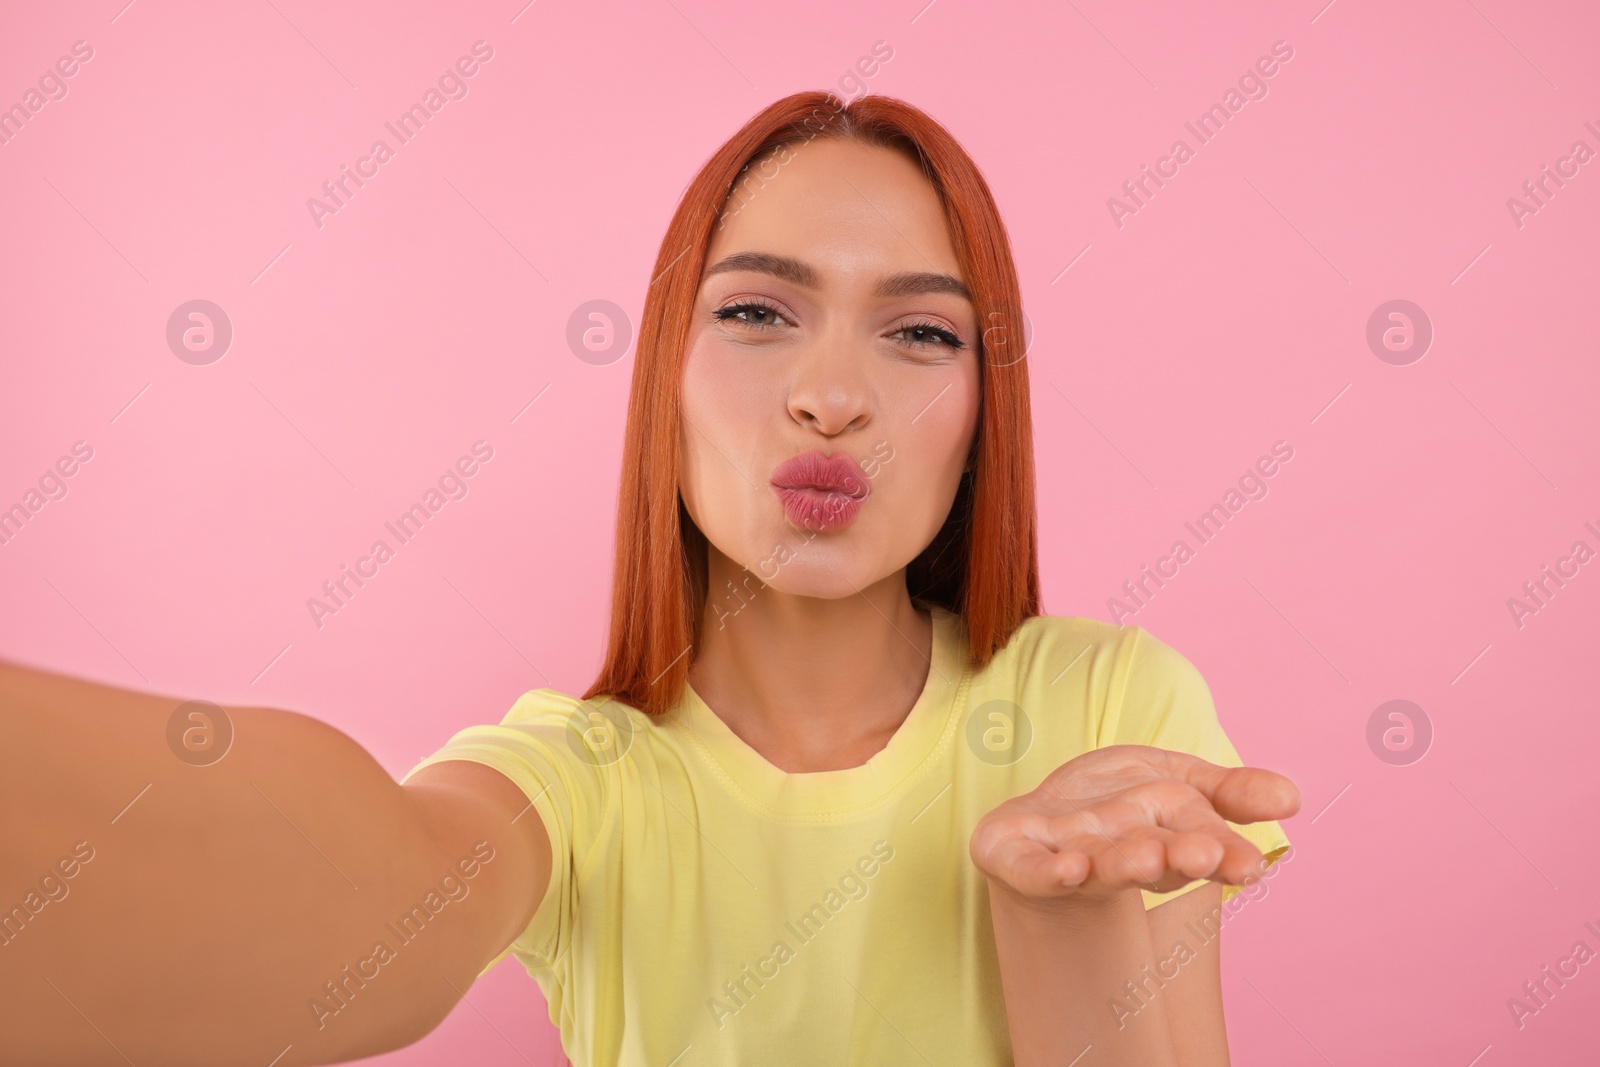 Photo of Beautiful woman taking selfie and blowing kiss on pink background